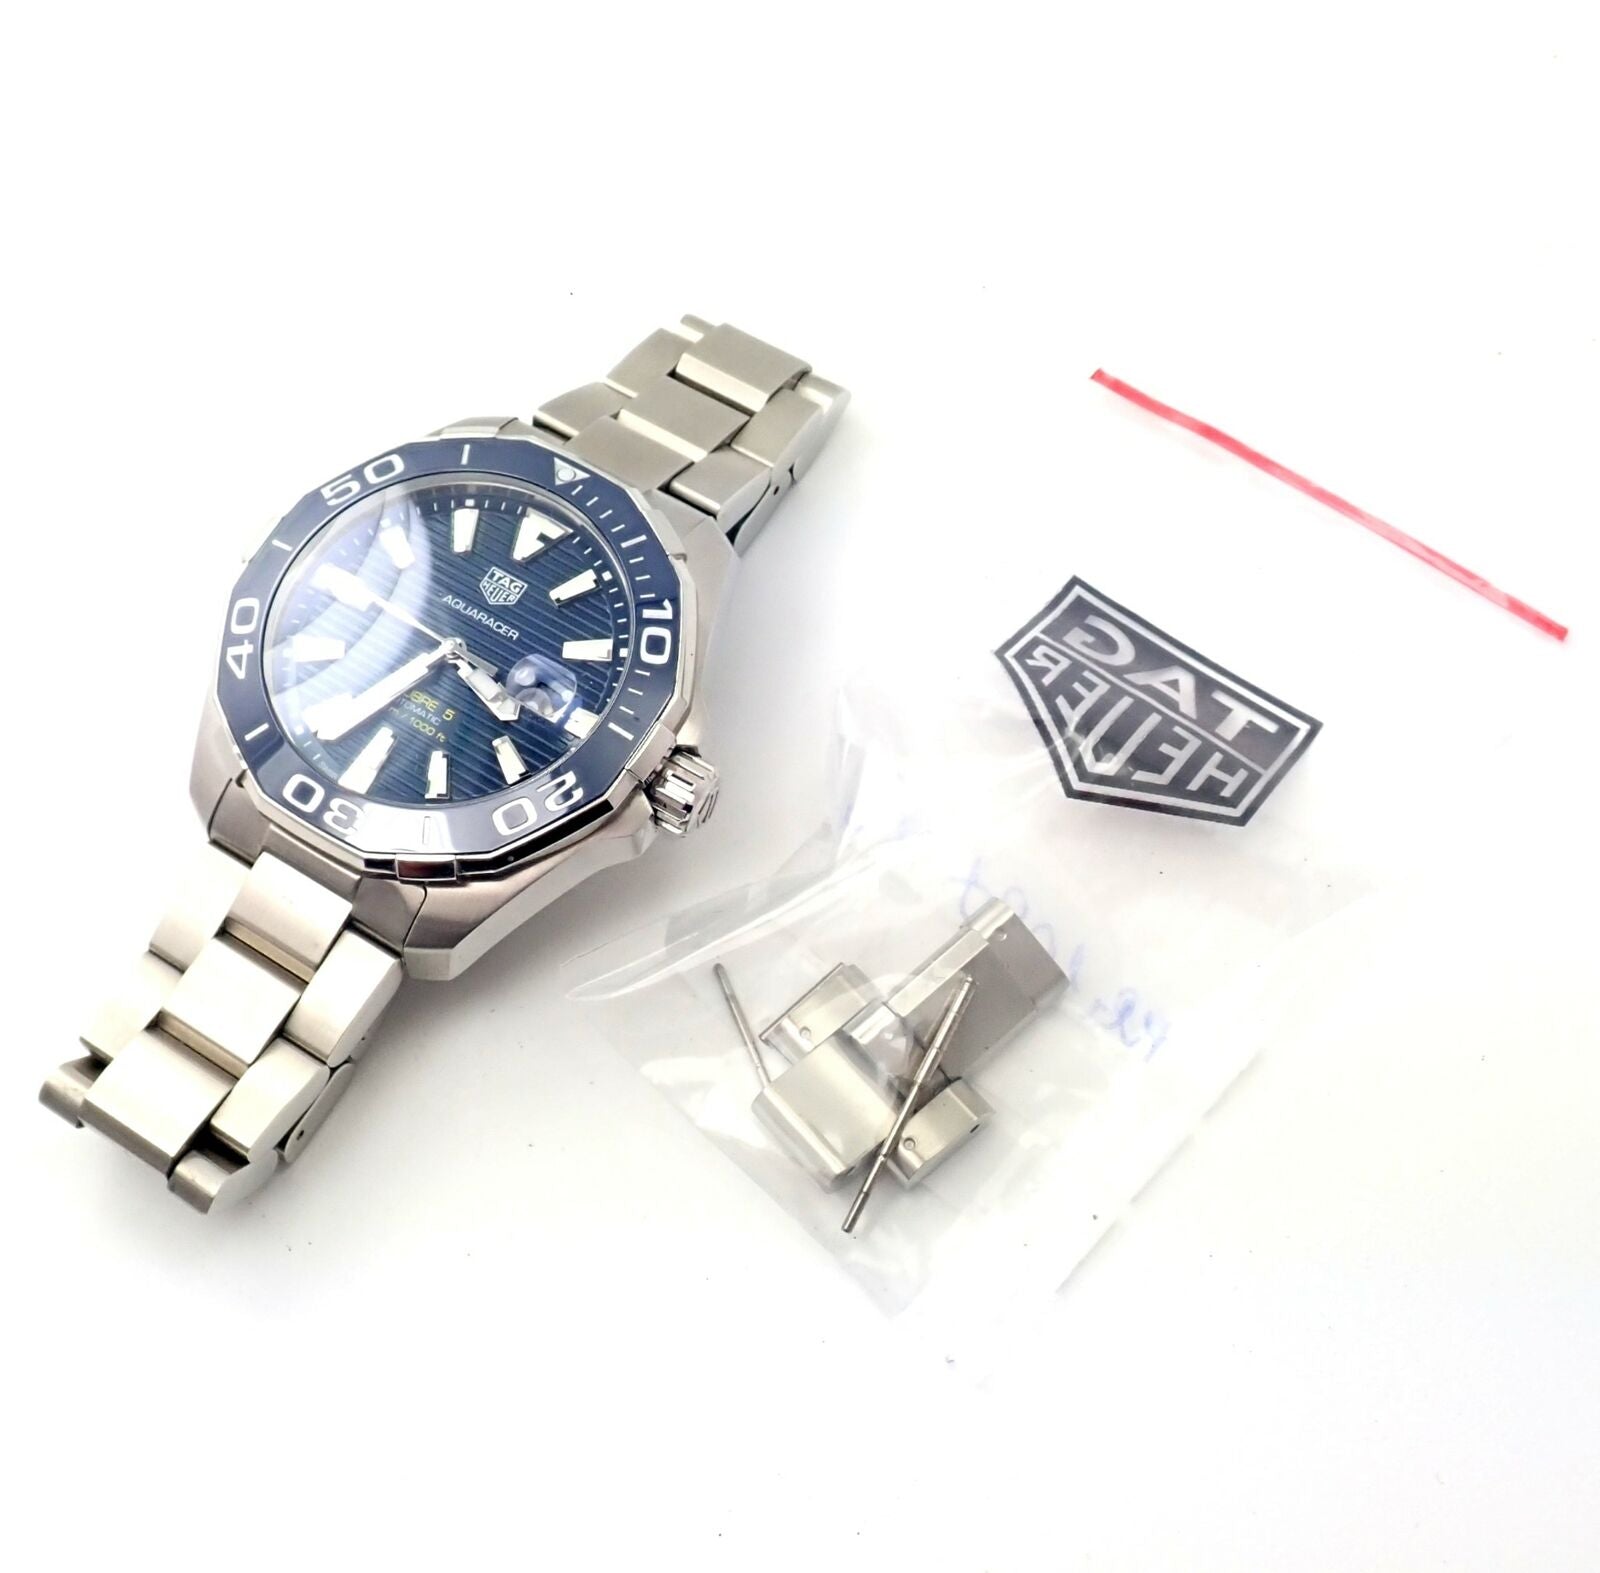 Tag Heuer, Accessories